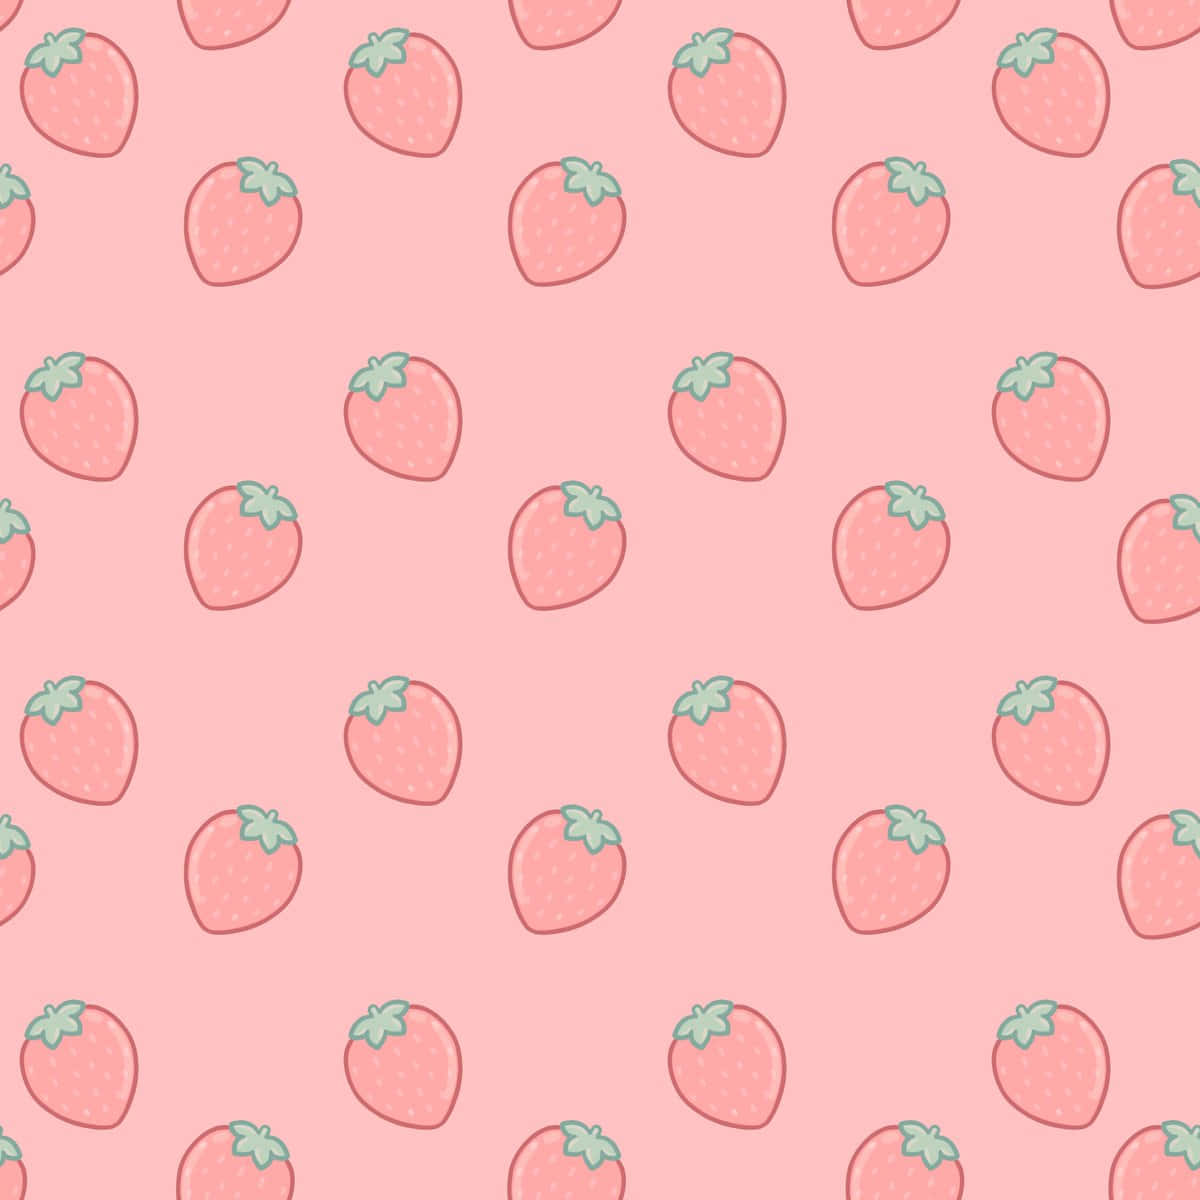 Vector cute strawberry pattern pastel background  free image by  rawpixelcom  marinemynt  Pastel pink wallpaper Cow print wallpaper  Iphone wallpaper pattern